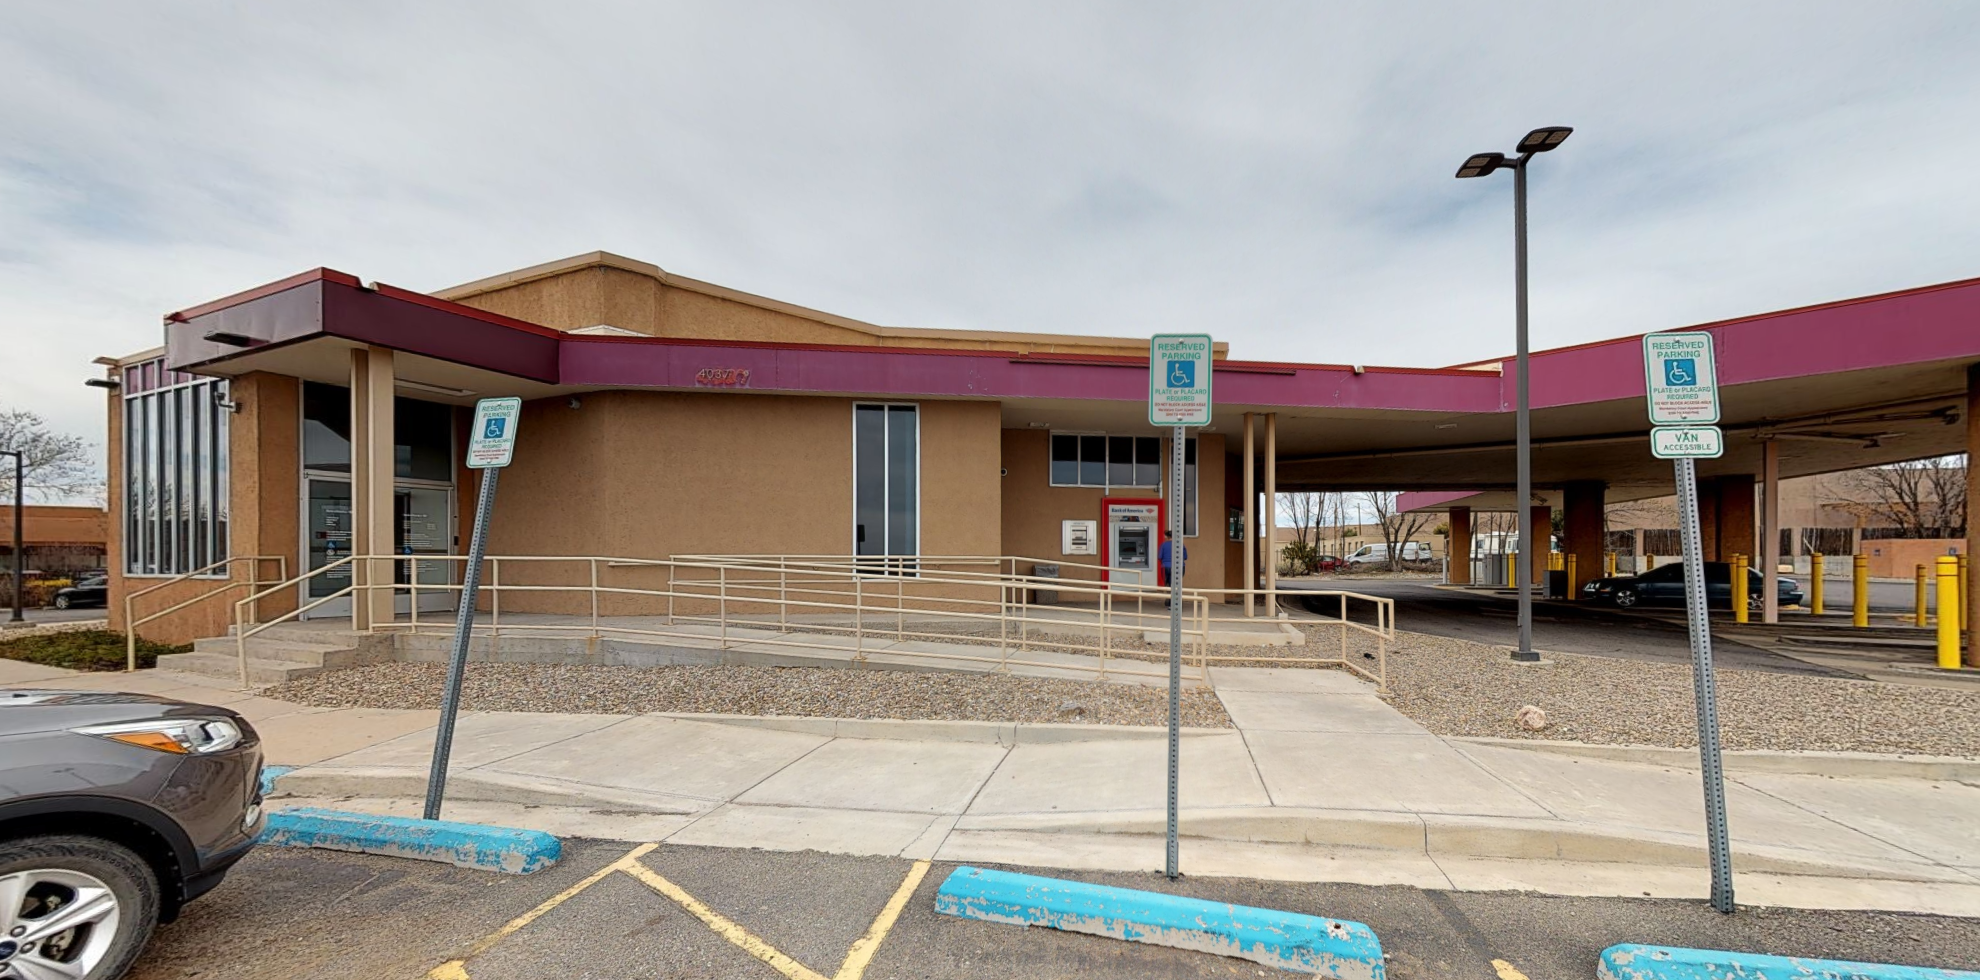 Bank of America financial center with drive-thru ATM | 4037 Rodeo Rd, Santa Fe, NM 87507